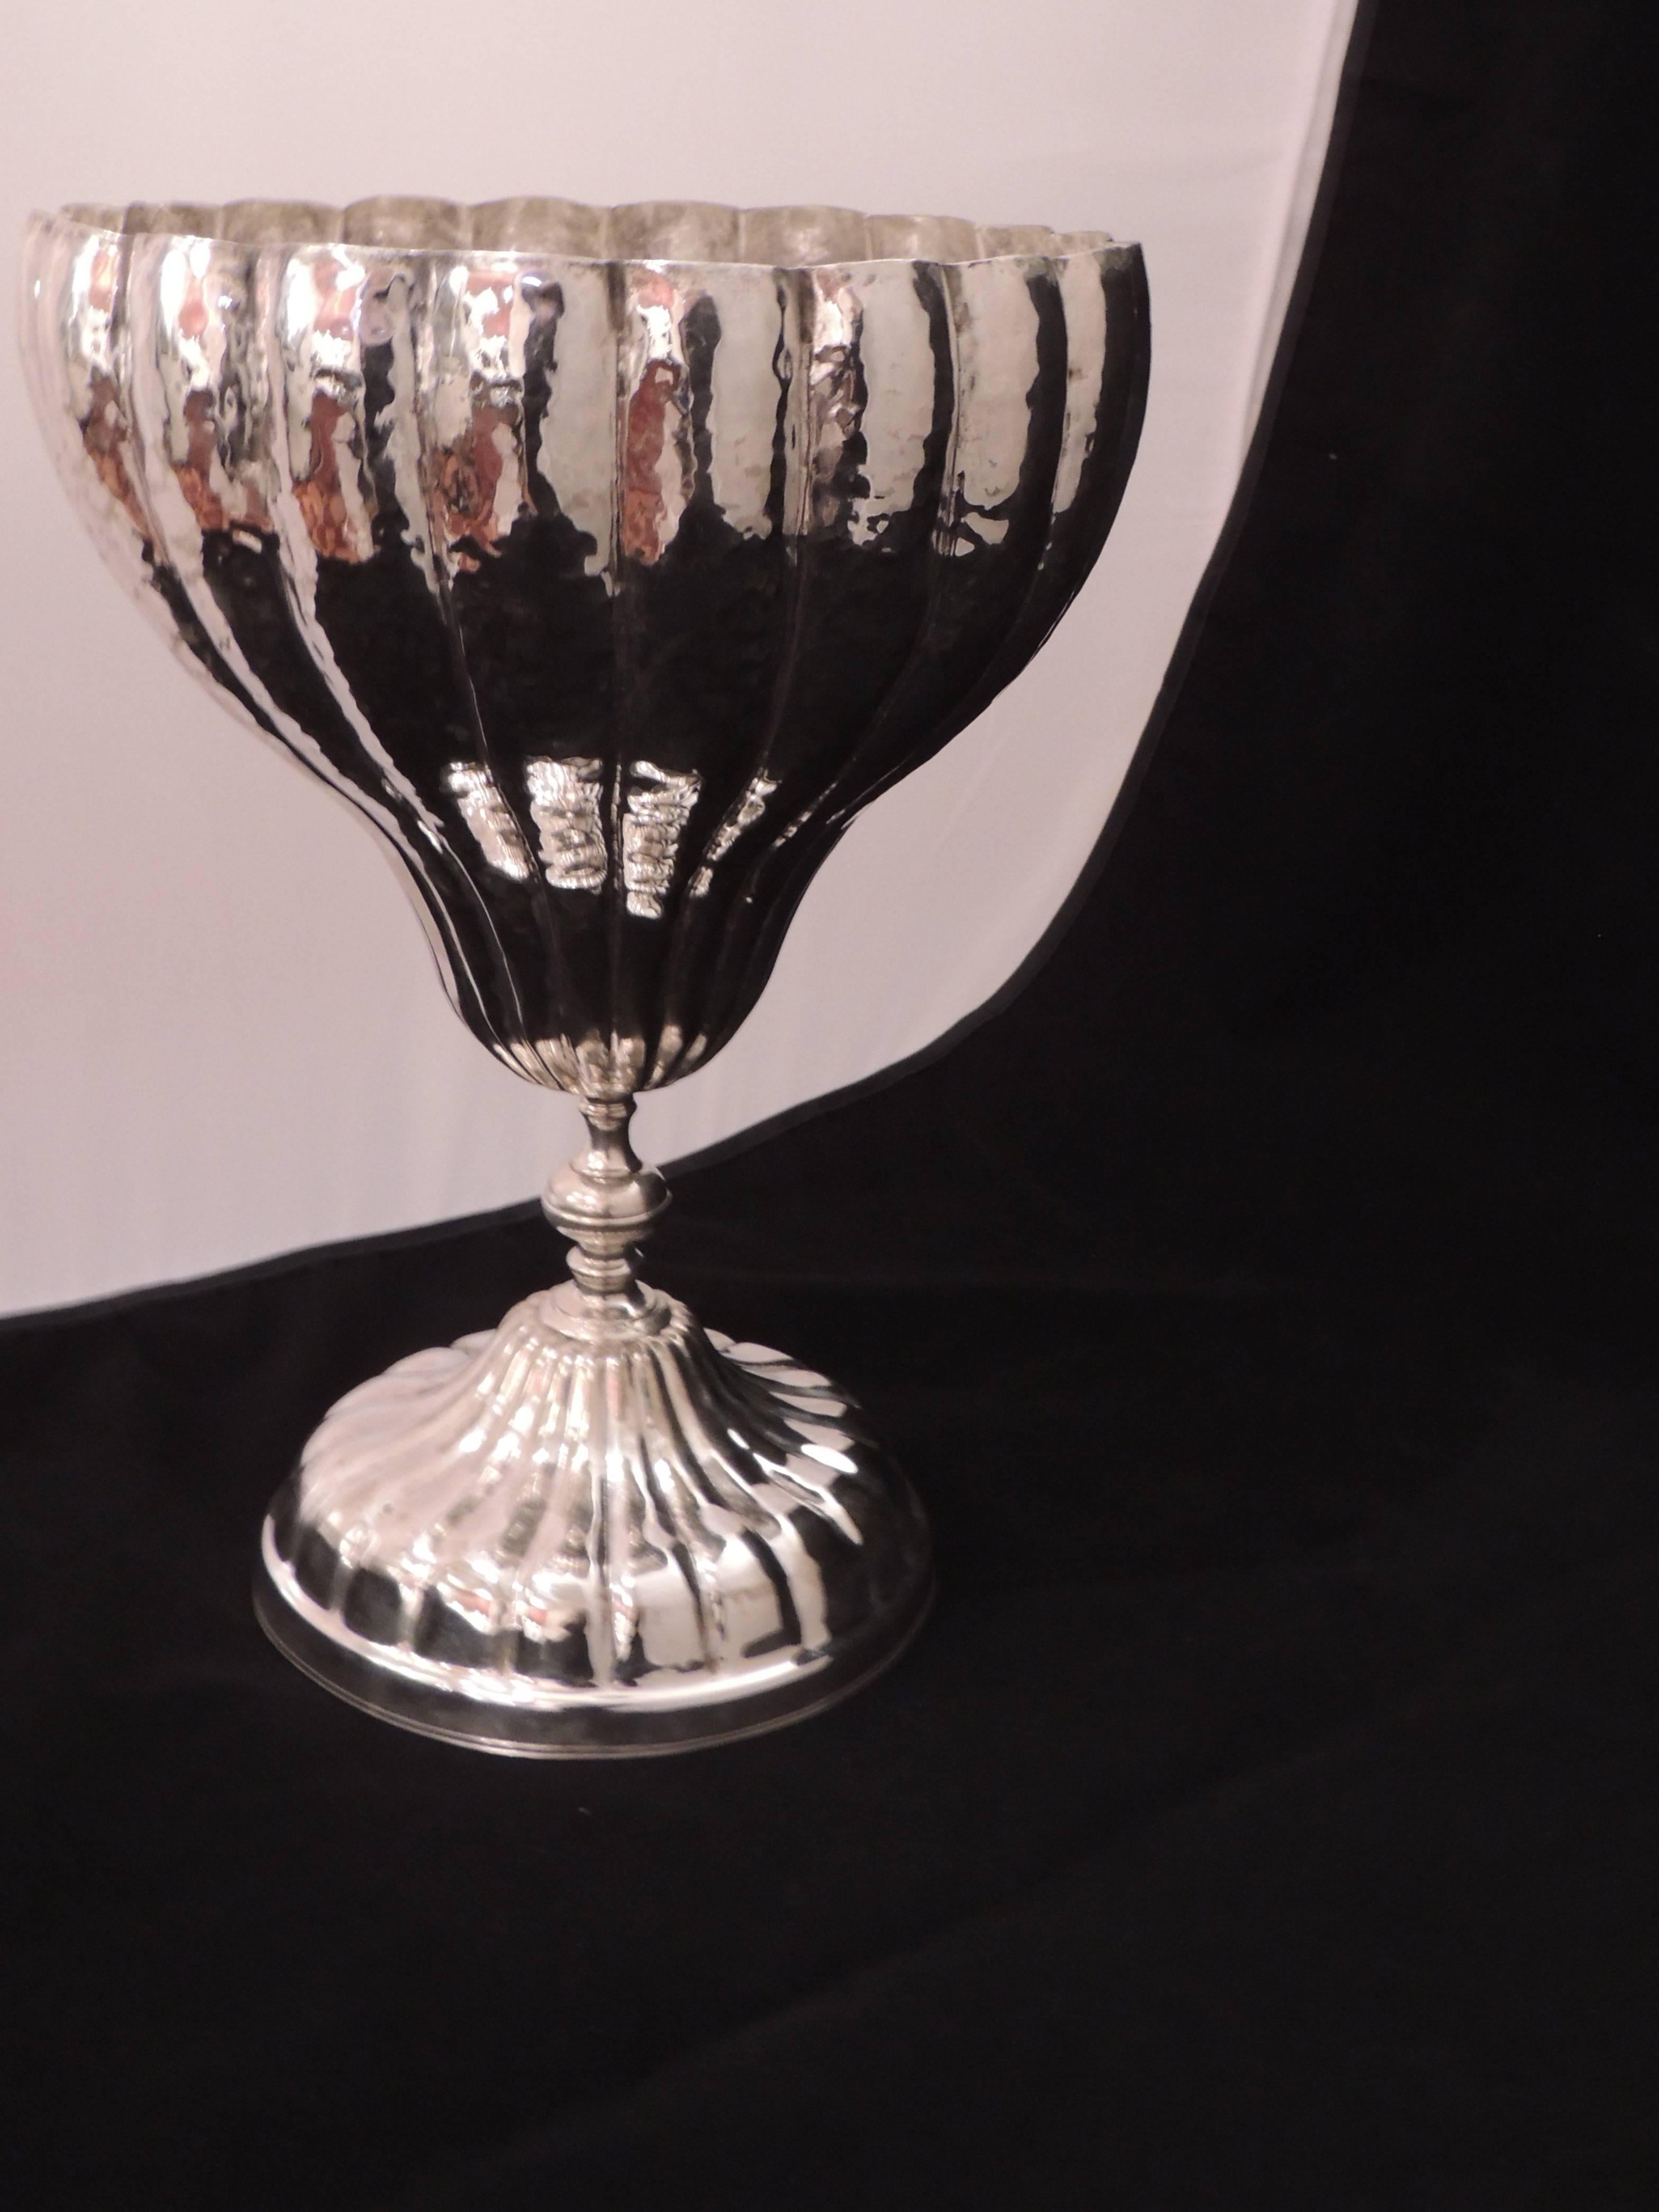 This monumental French silver chalice can be a decorative piece for a tabletop, filled with fruit and flowers or simply as a piece to be admired. This one, in delicately hand crafted silver is stamped on the bottom with the initials” A G ” and ”